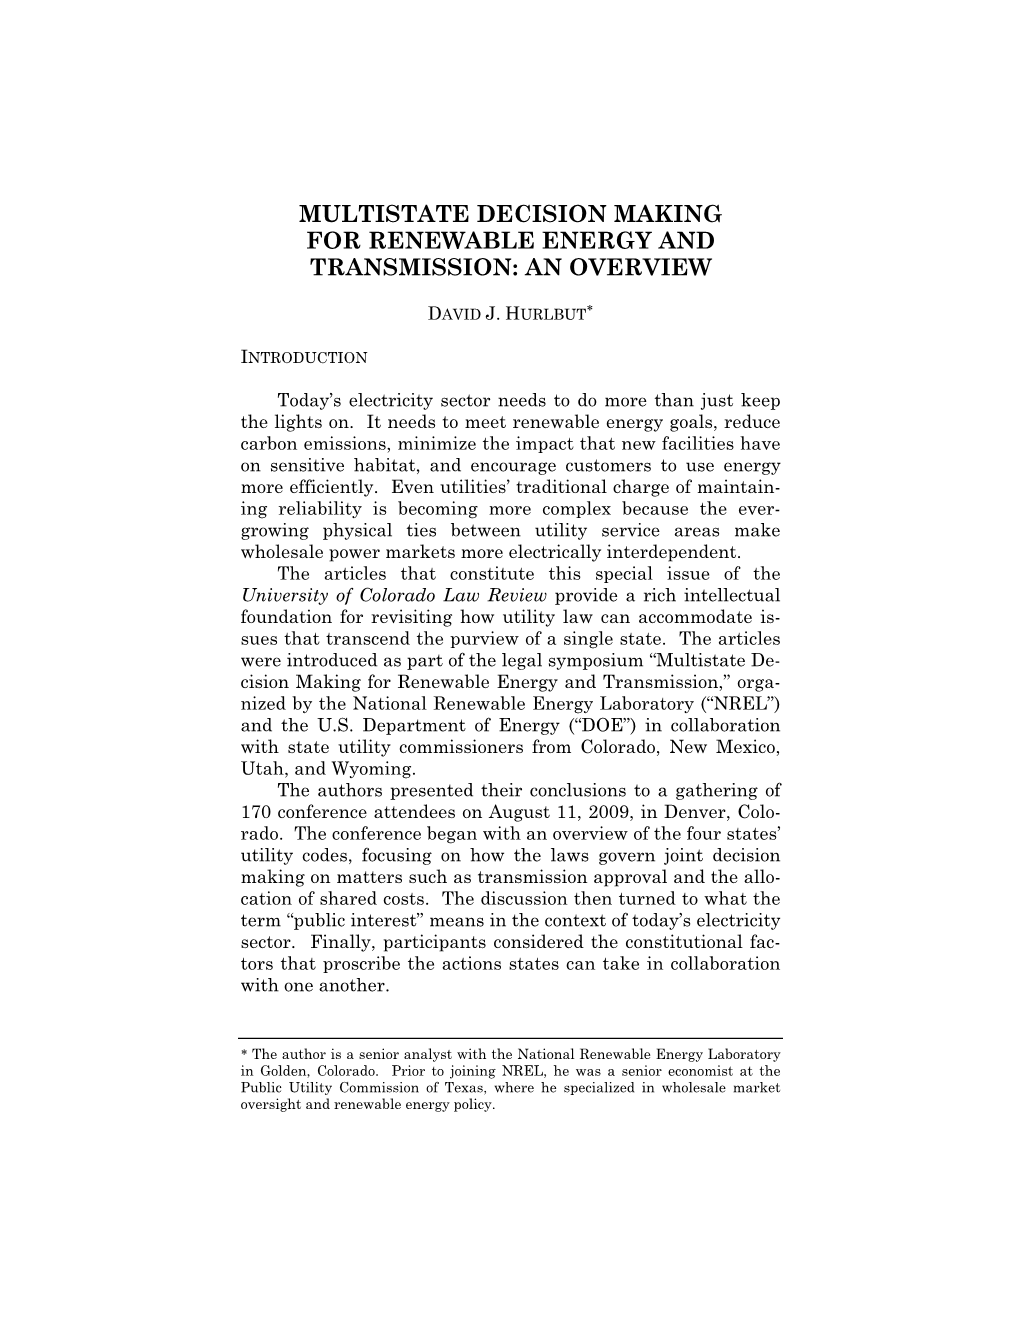 Multistate Decision Making for Renewable Energy and Transmission: an Overview